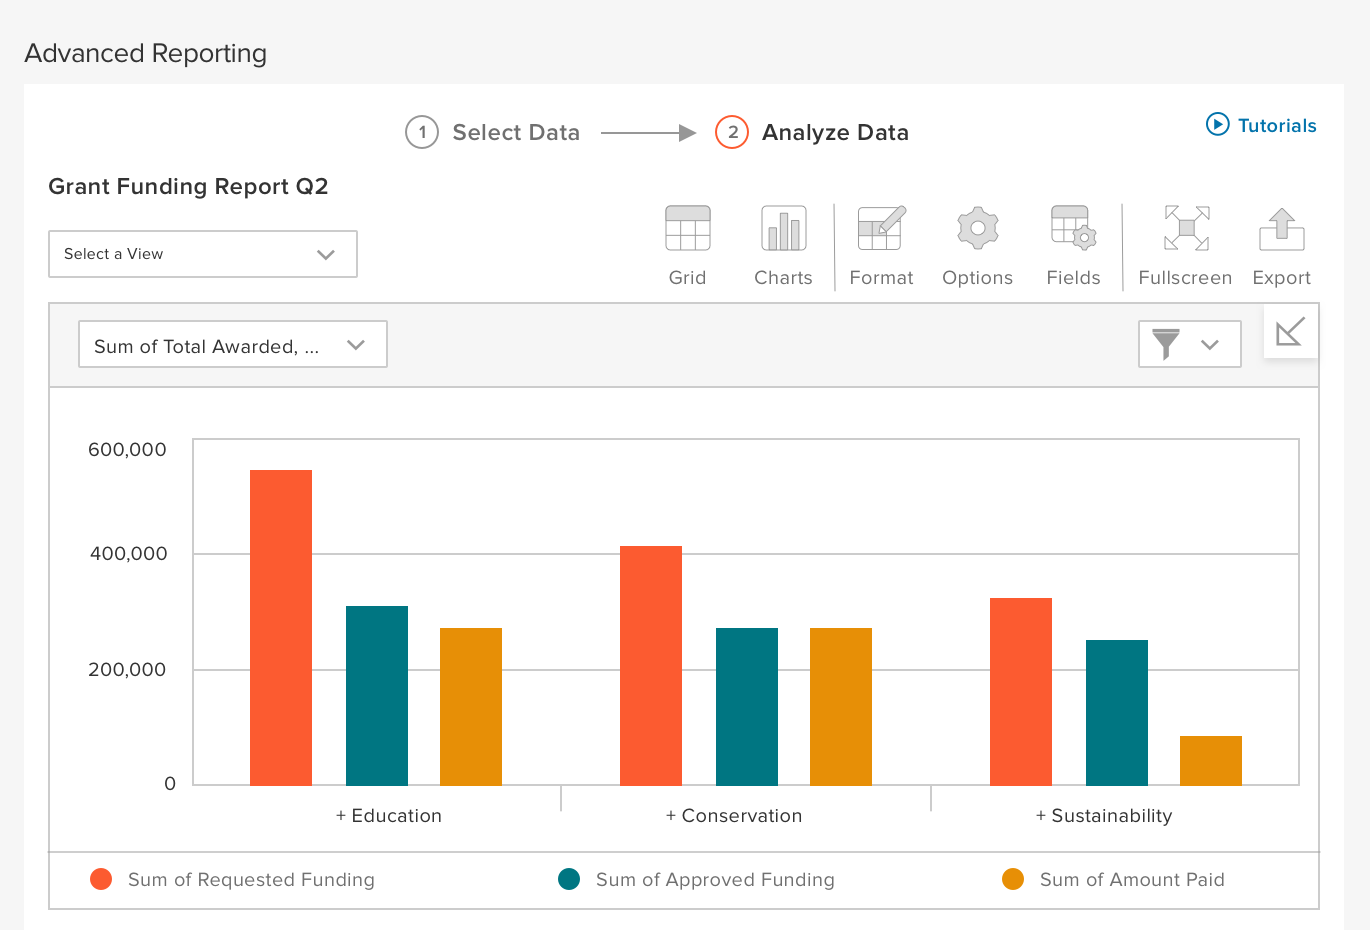 Analyze your data to report on success and learn for next time with on demand reports and built in charts and graphs.